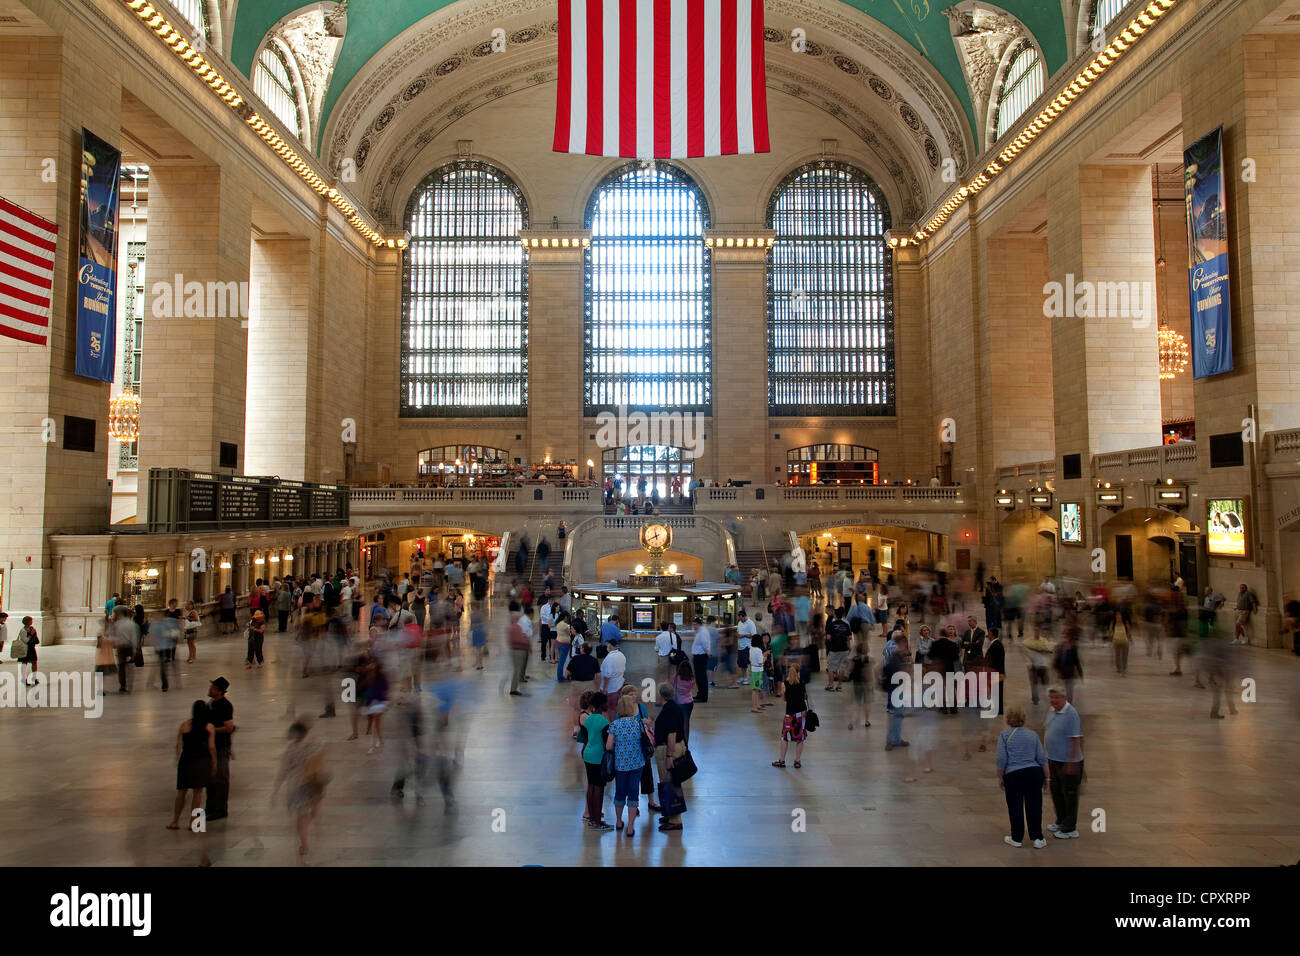 United States New York City Midtown Grand Central Terminal built in 1913 biggest railway station in worl in platforms number Stock Photo